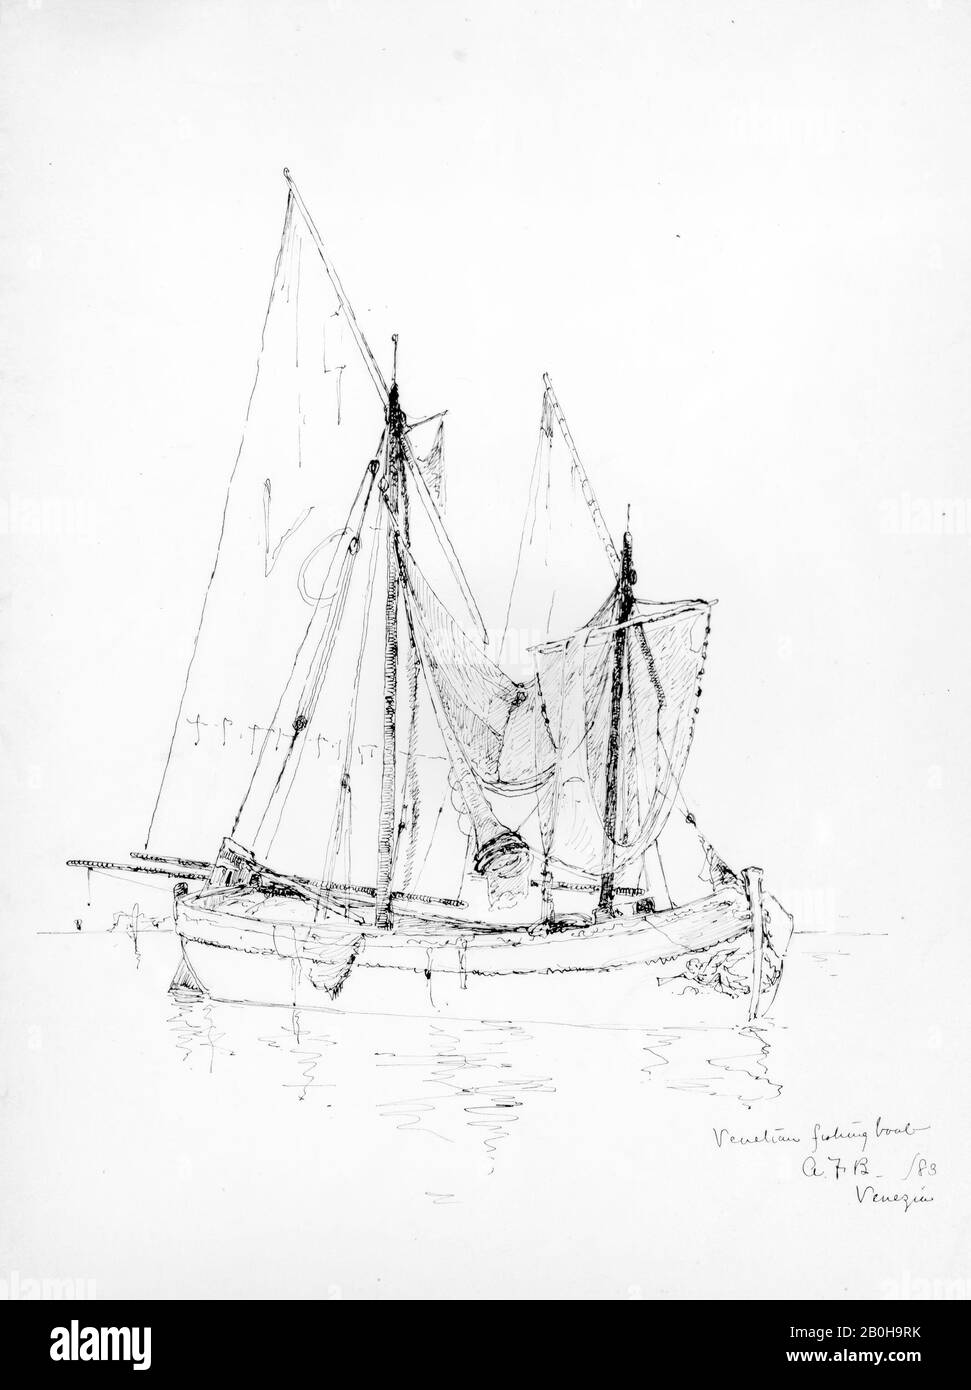 Andrew Fisher Bunner, Venetian Fishing Boat, Venice, American, Andrew Fisher Bunner (53-1897), 1883, American, Black Ink and Graphit Traces on off-White Wove Paper, 12 15/16 x 9 3/4 in. (32,9 x 24,8 cm), Zeichnungen Stockfoto